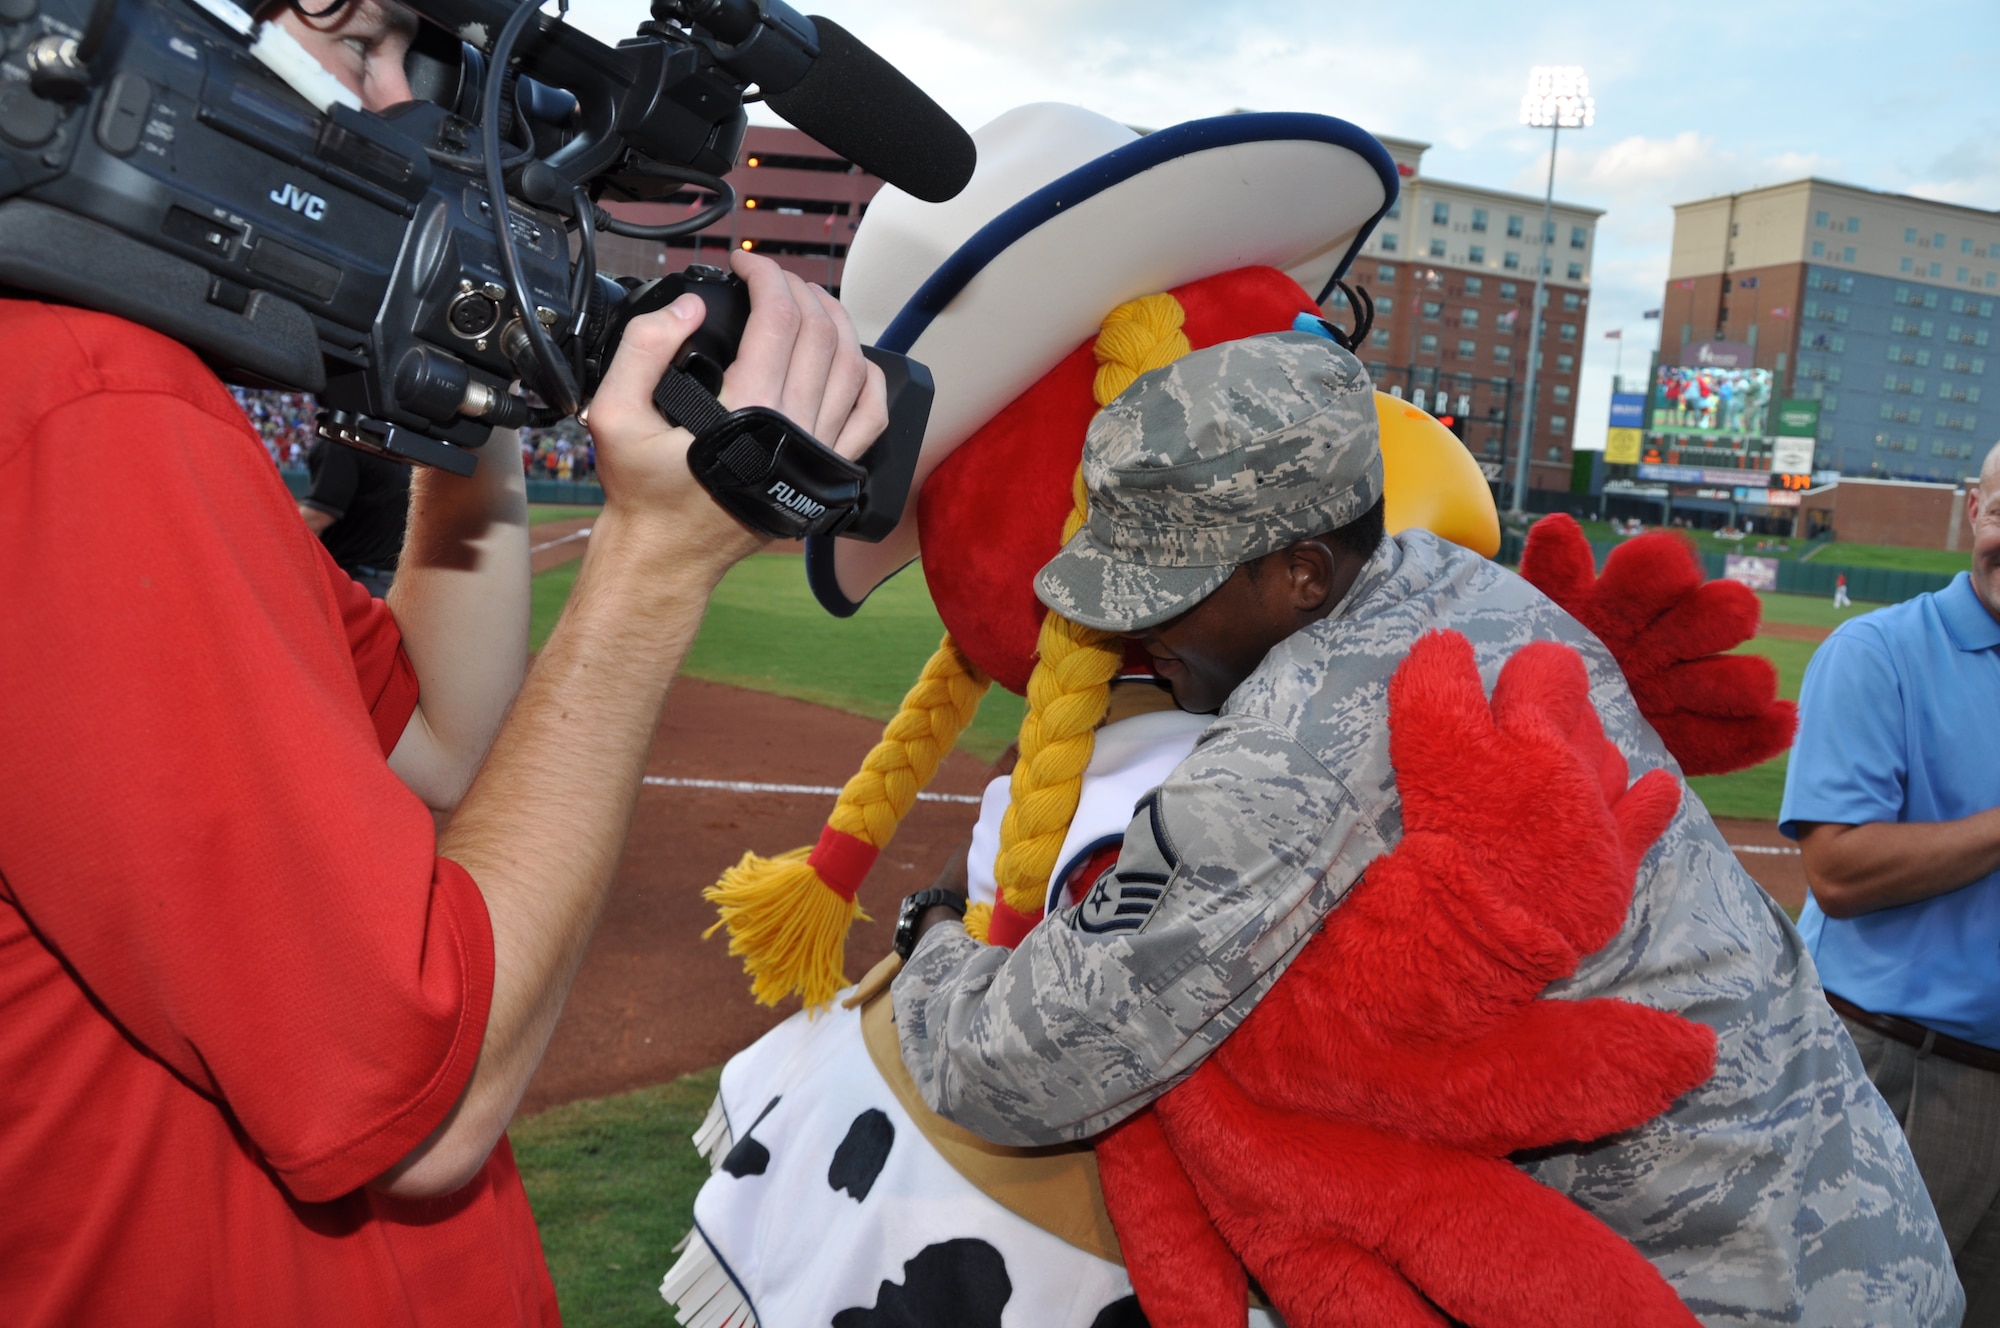 Master Sgt. Adrian Mack, 507th Maintenance Squadron gives Cooper the Oklahoma City RedHawks mascot a big hug after being recognized by the crowd at the military appreciation game July 27.  (U.S. Air Force Photo/Maj. Jon Quinlan)  